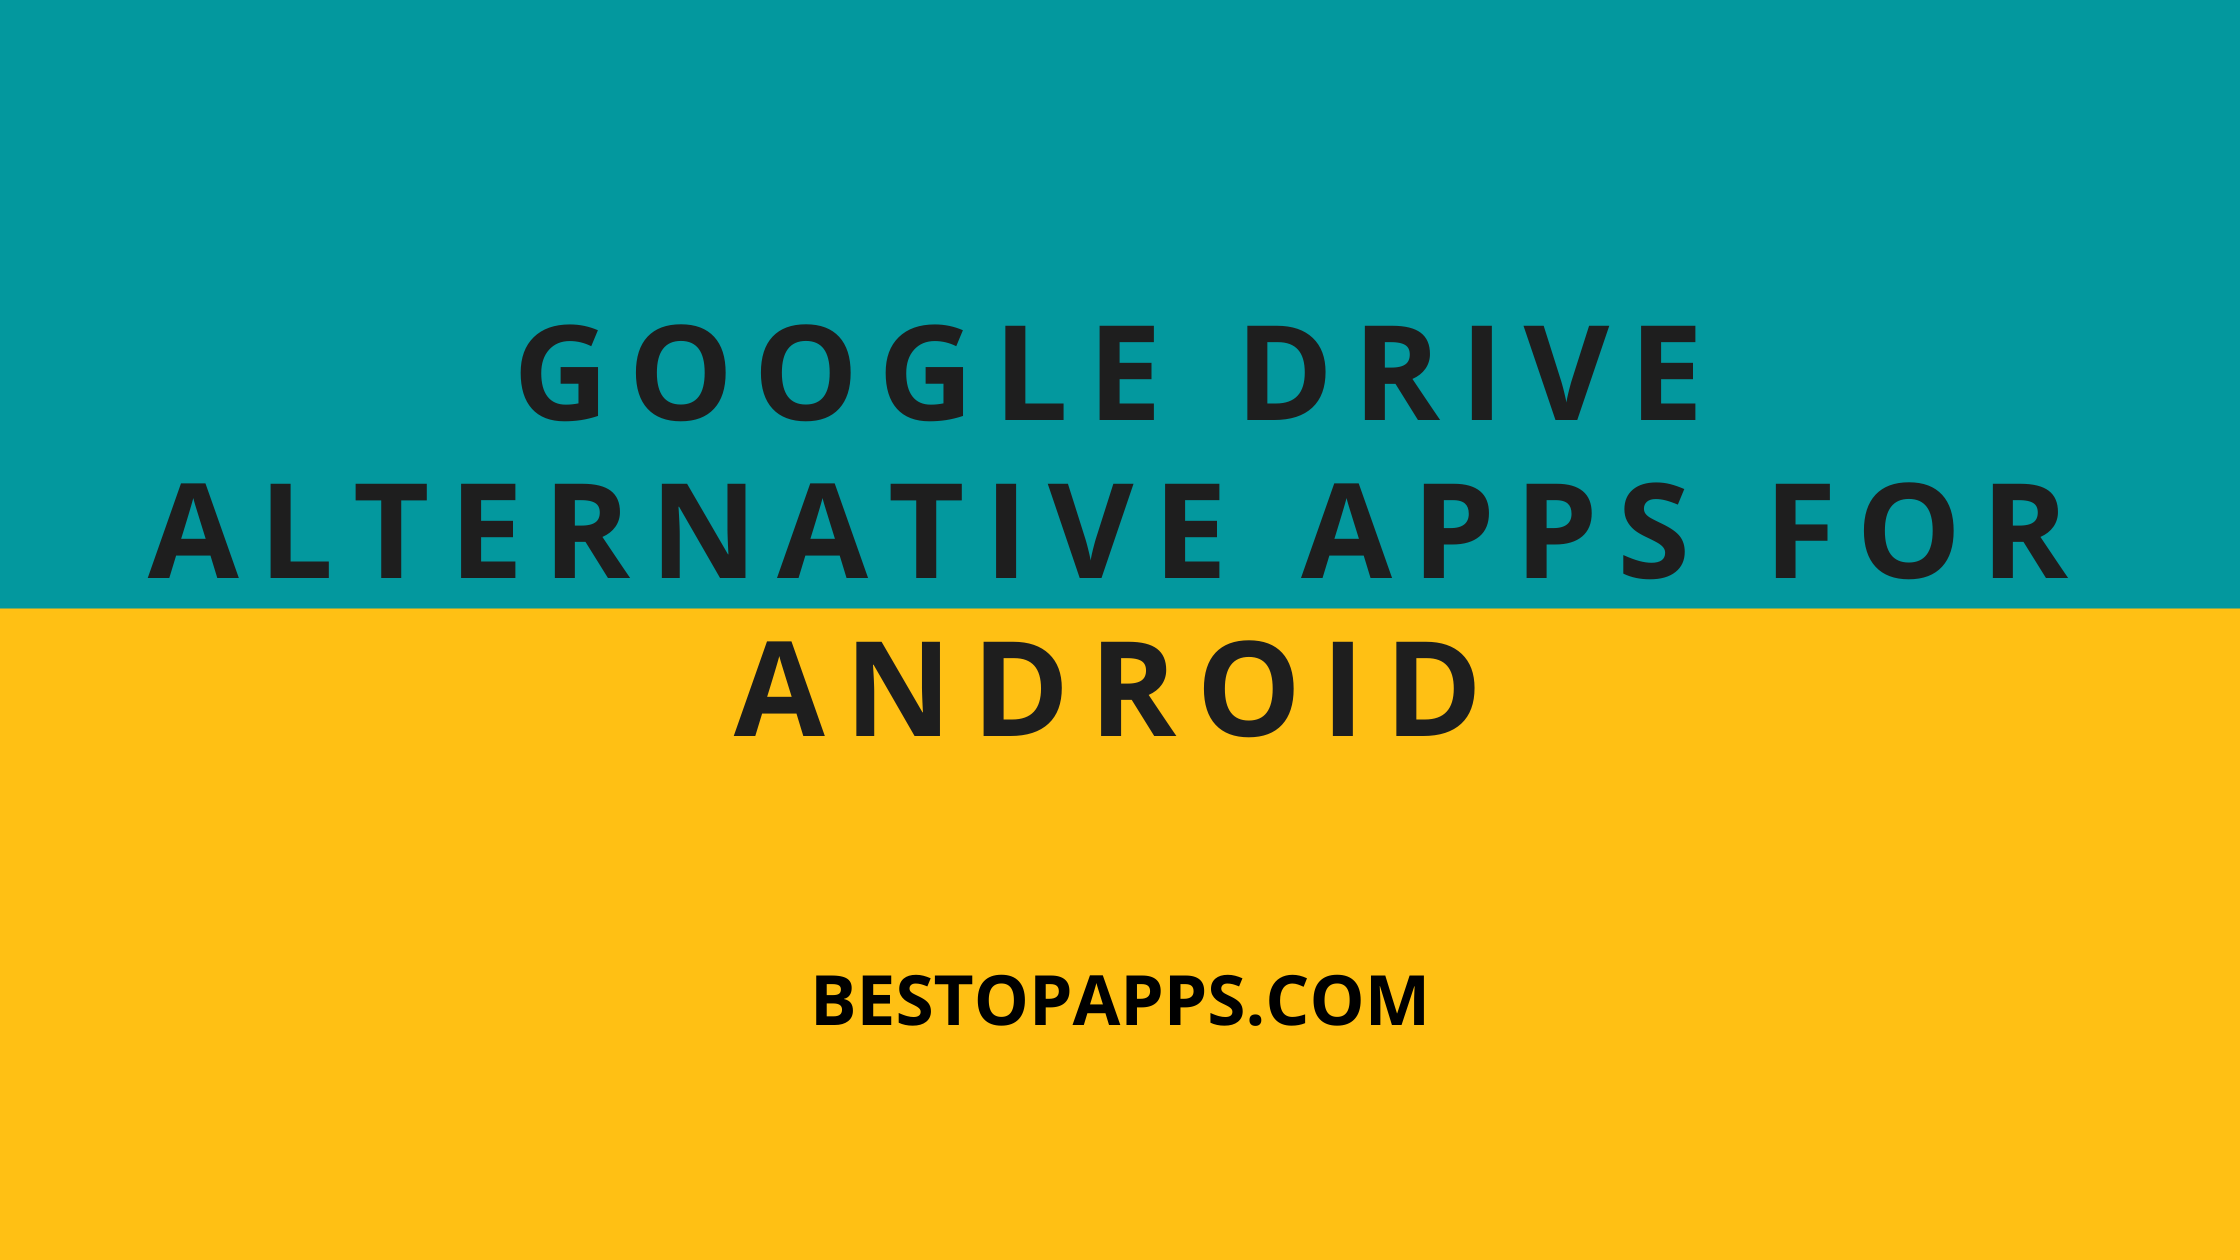 Google Drive Alternative Apps for Android